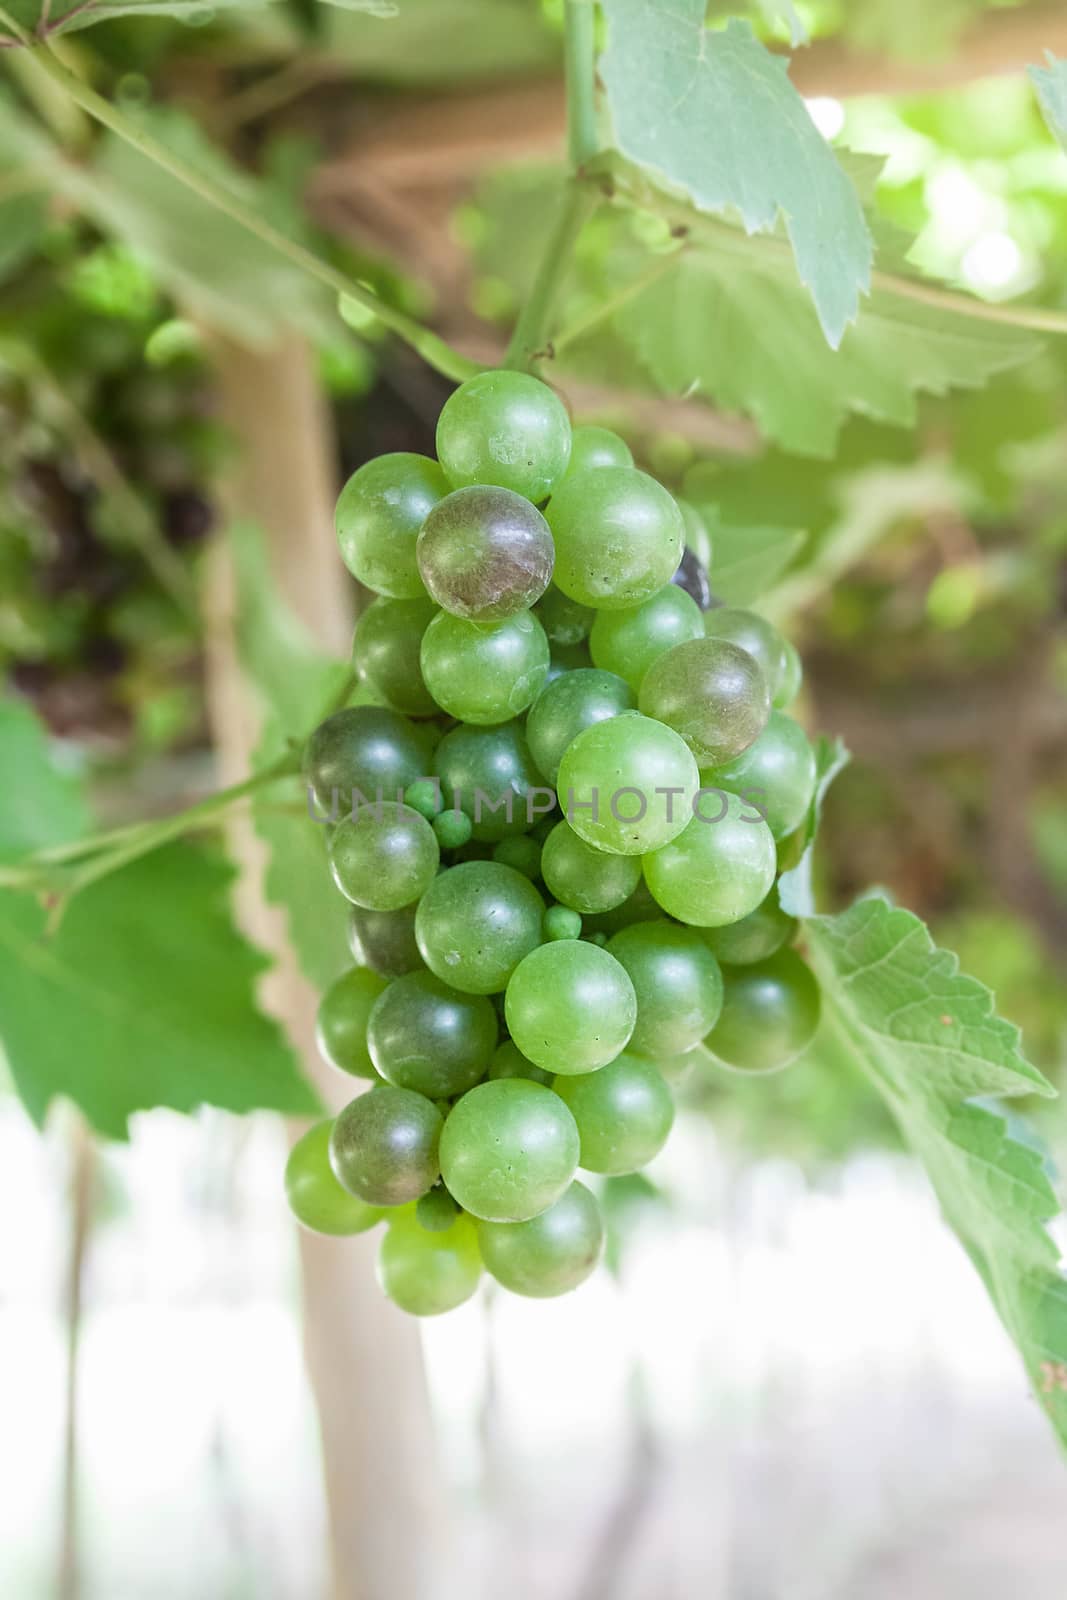 bunch of green grapes on the vine with green leaves